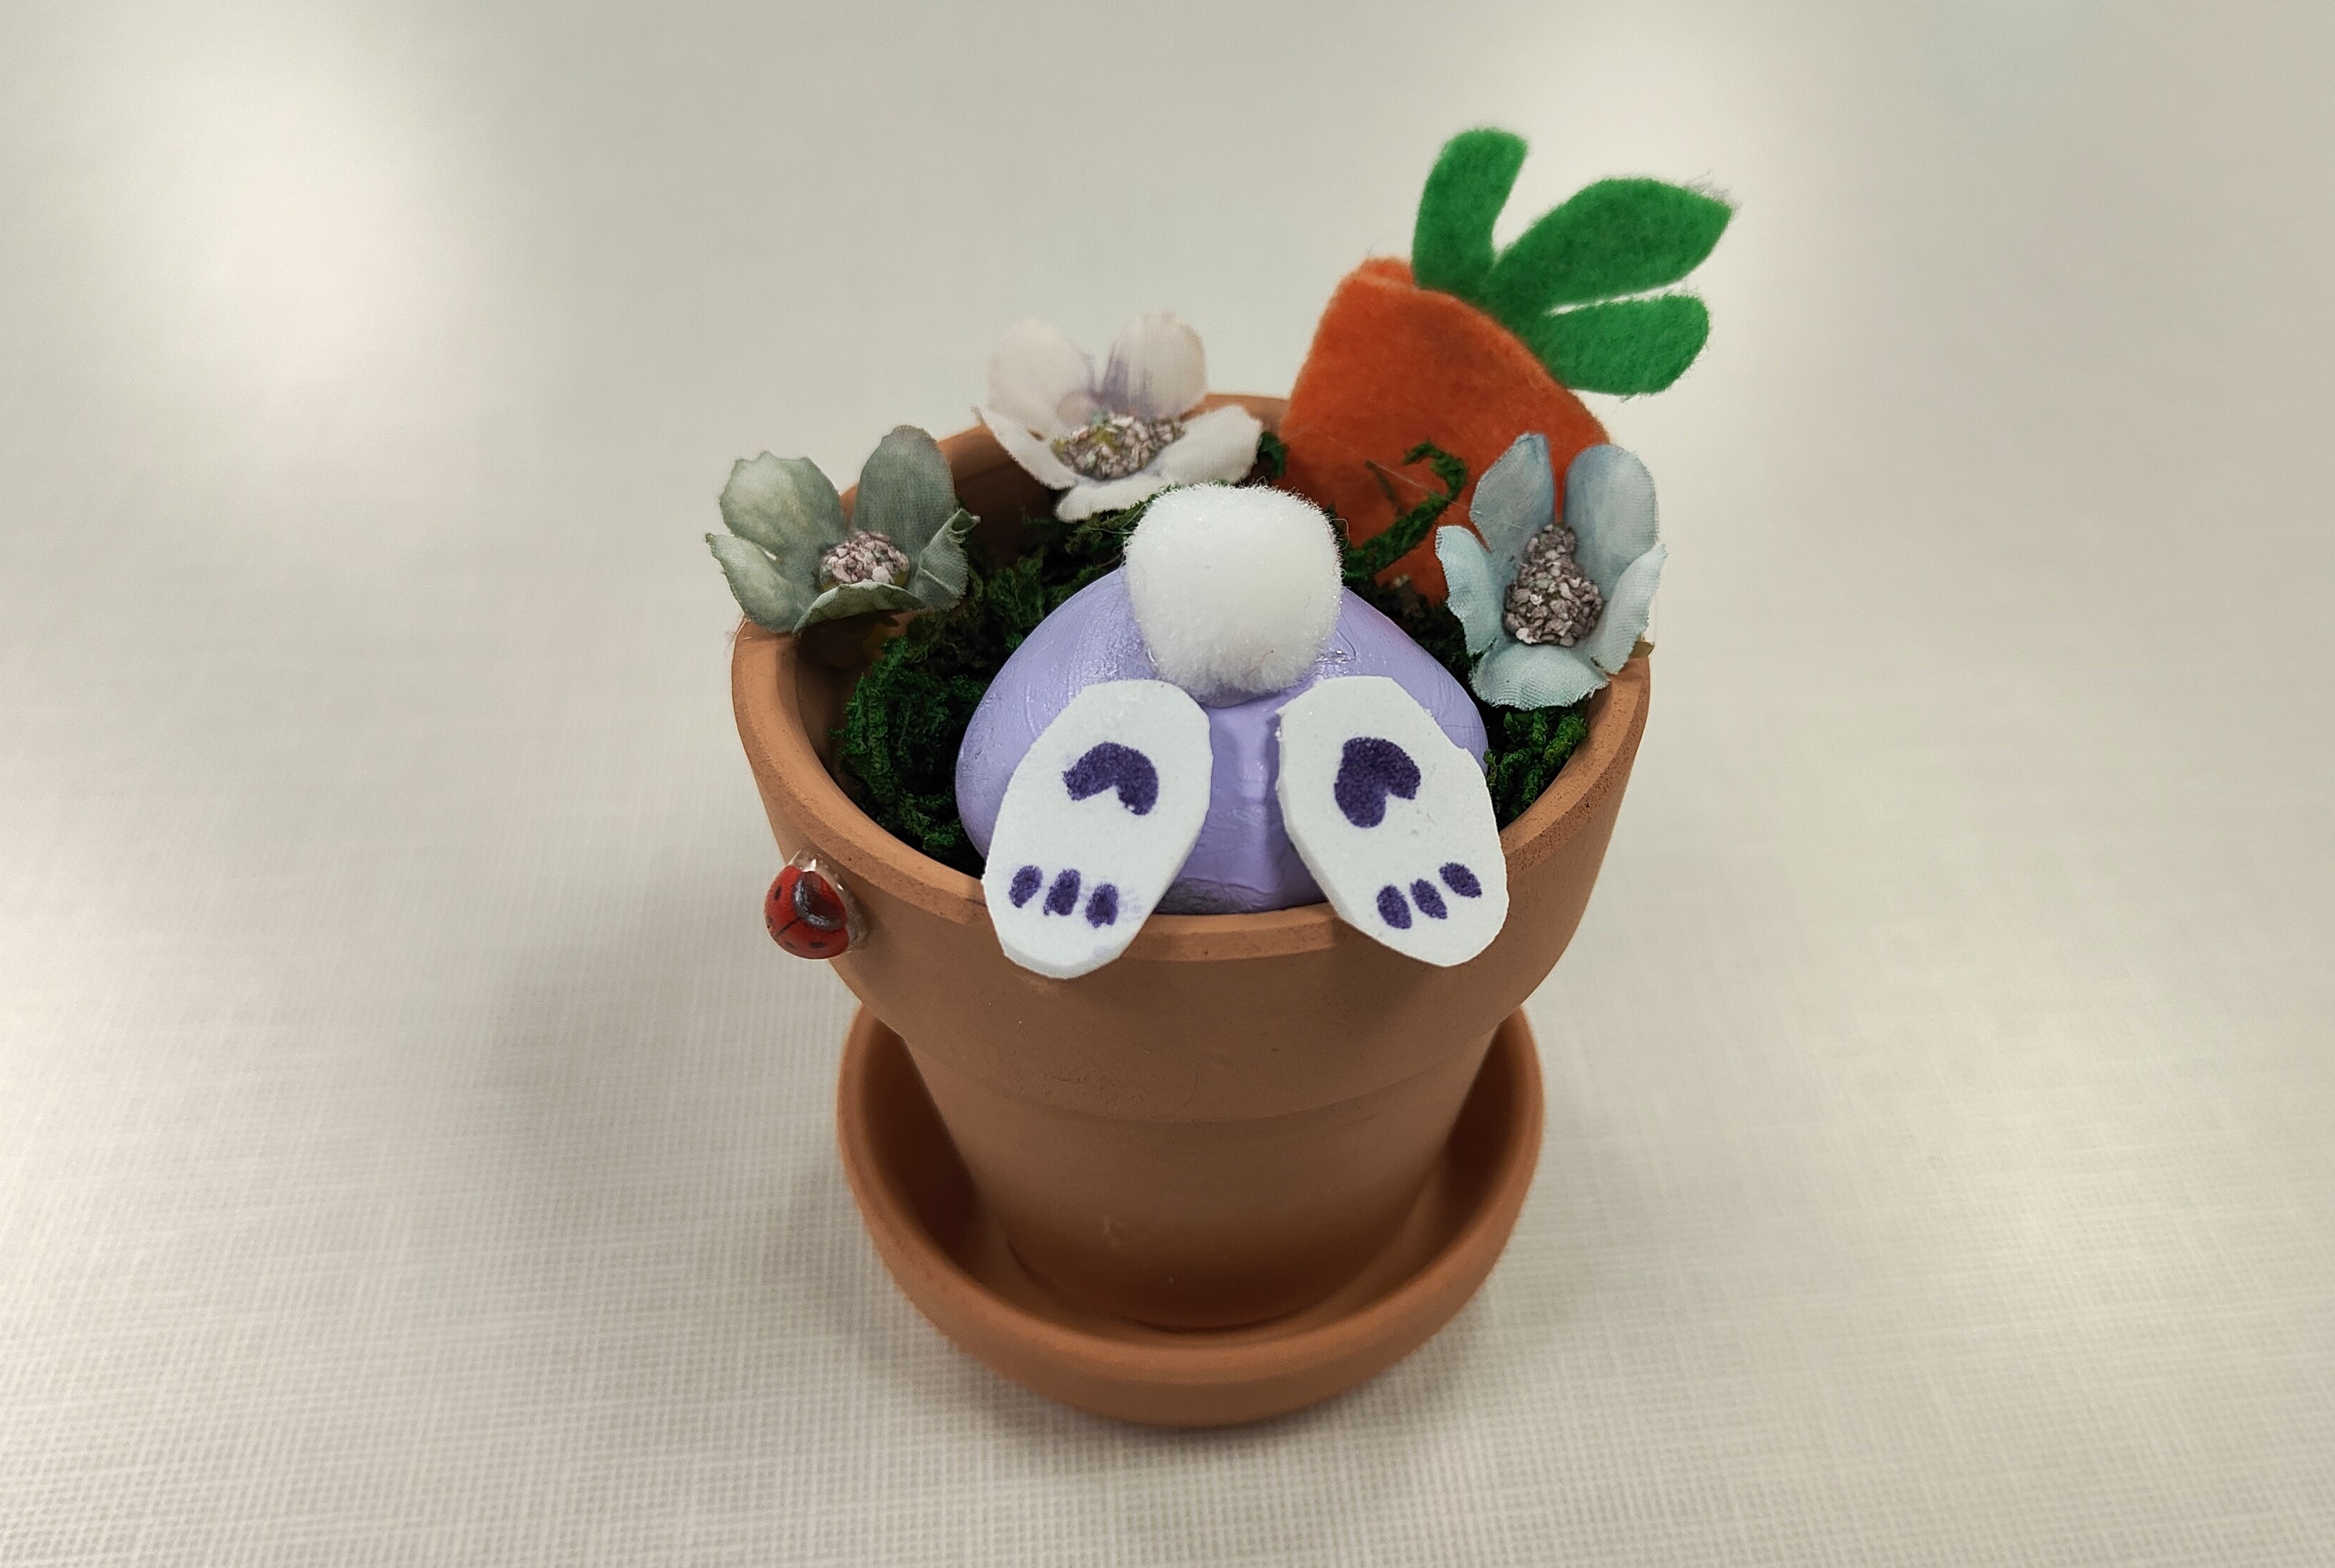 clay pot with a bunny, flowers, and felt carrot